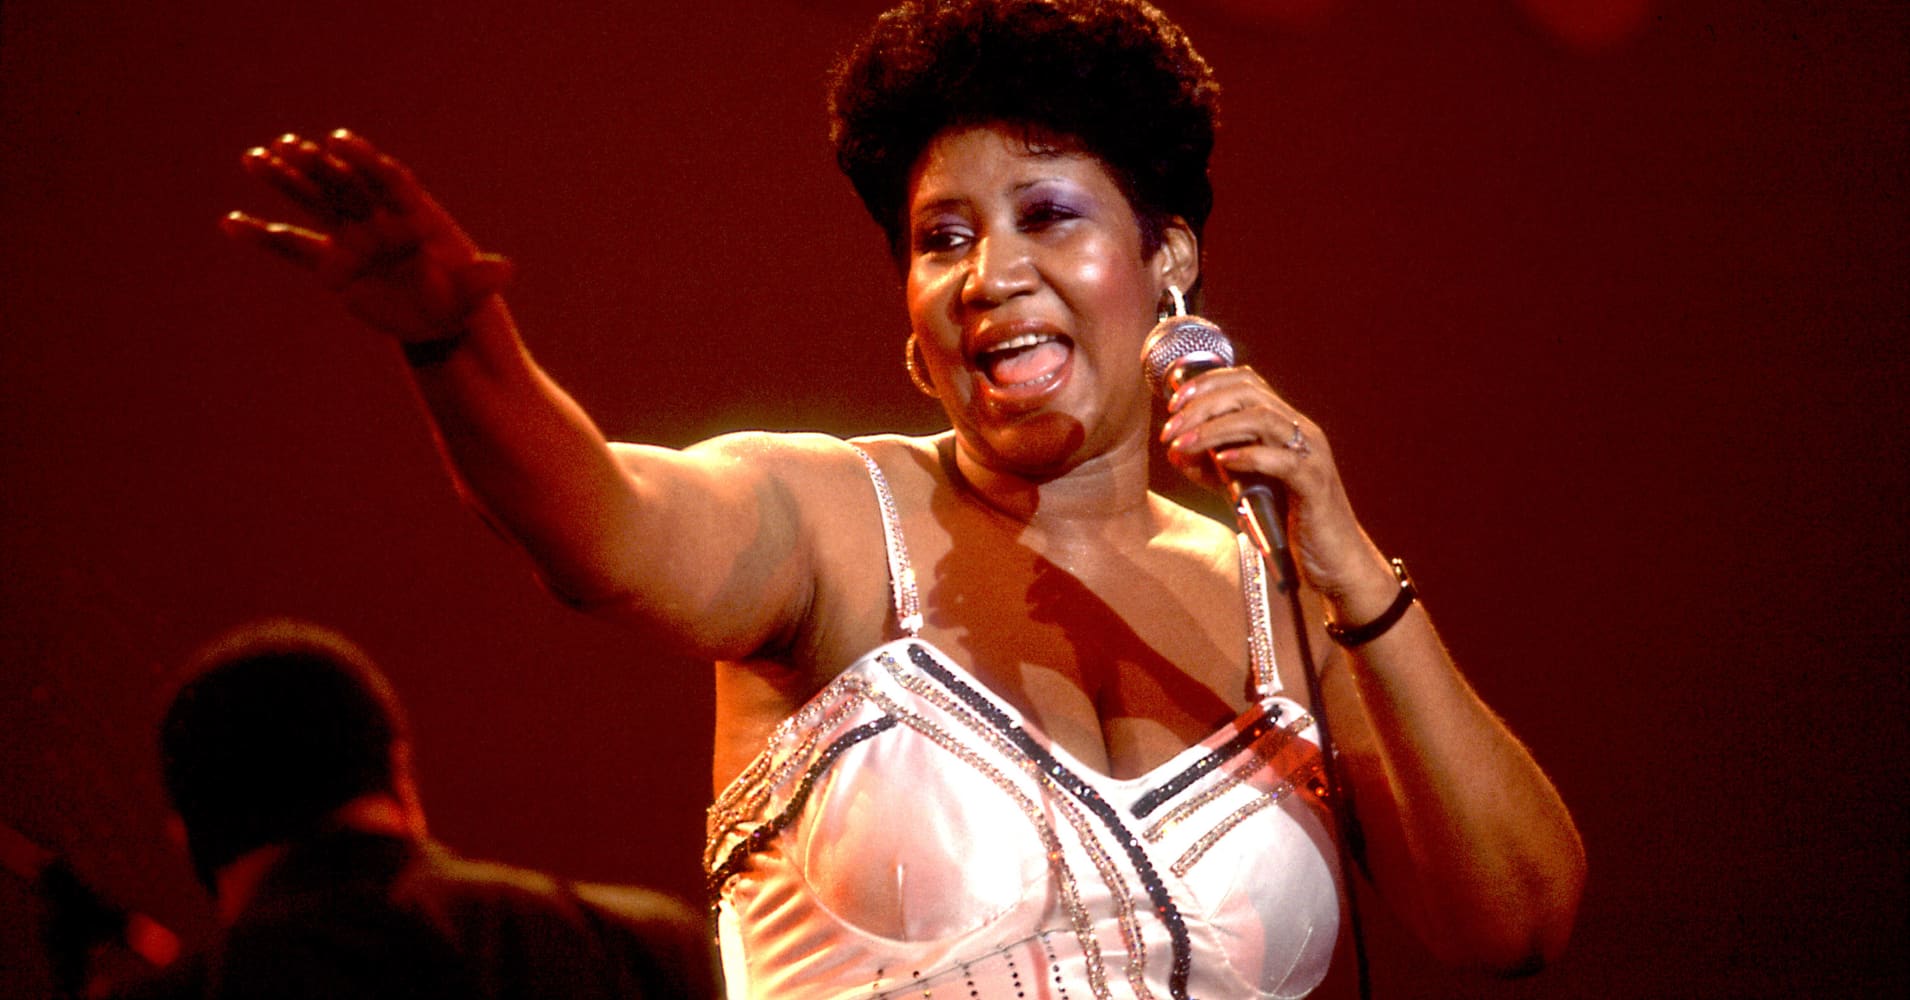 Whether 'Queen of Soul' or just a commoner, here's why you need a will